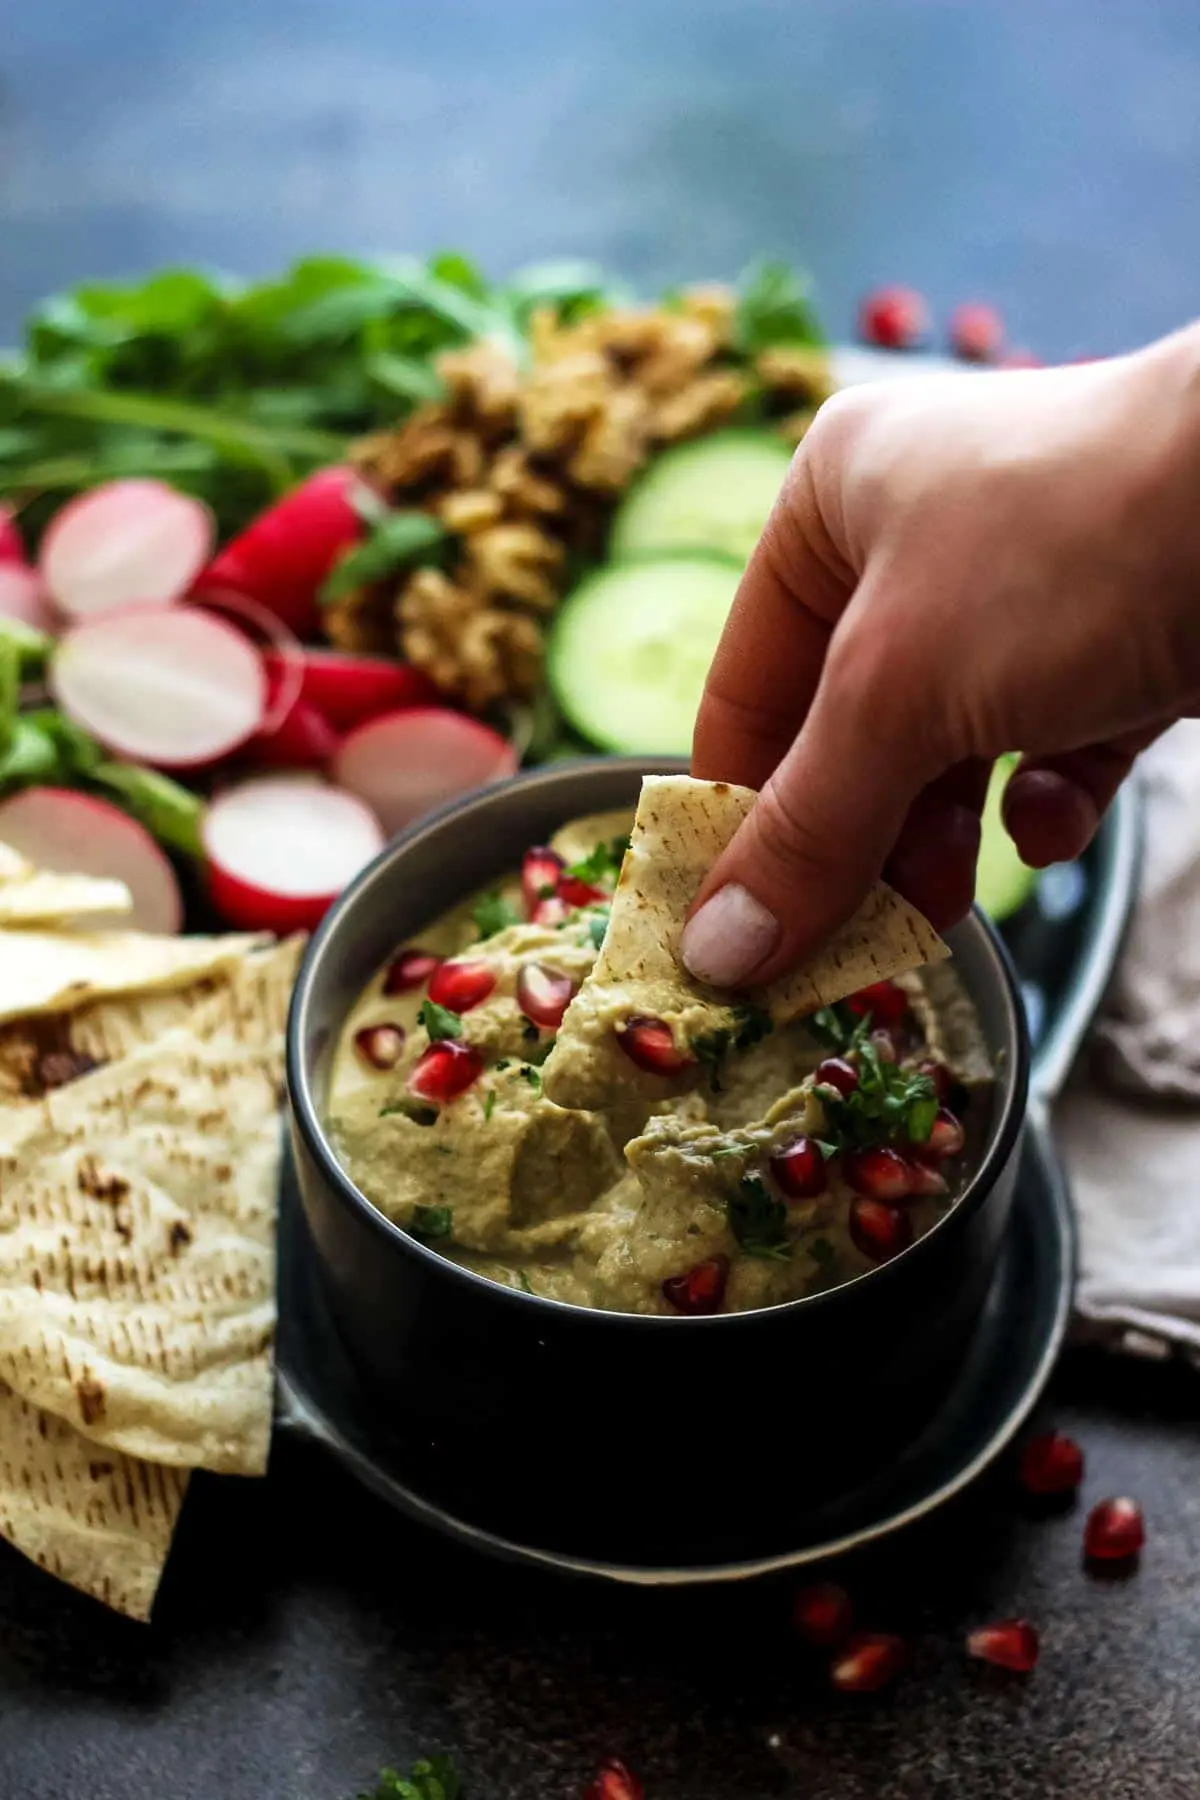 Dipping Pita Chips in an Eggplant Dip